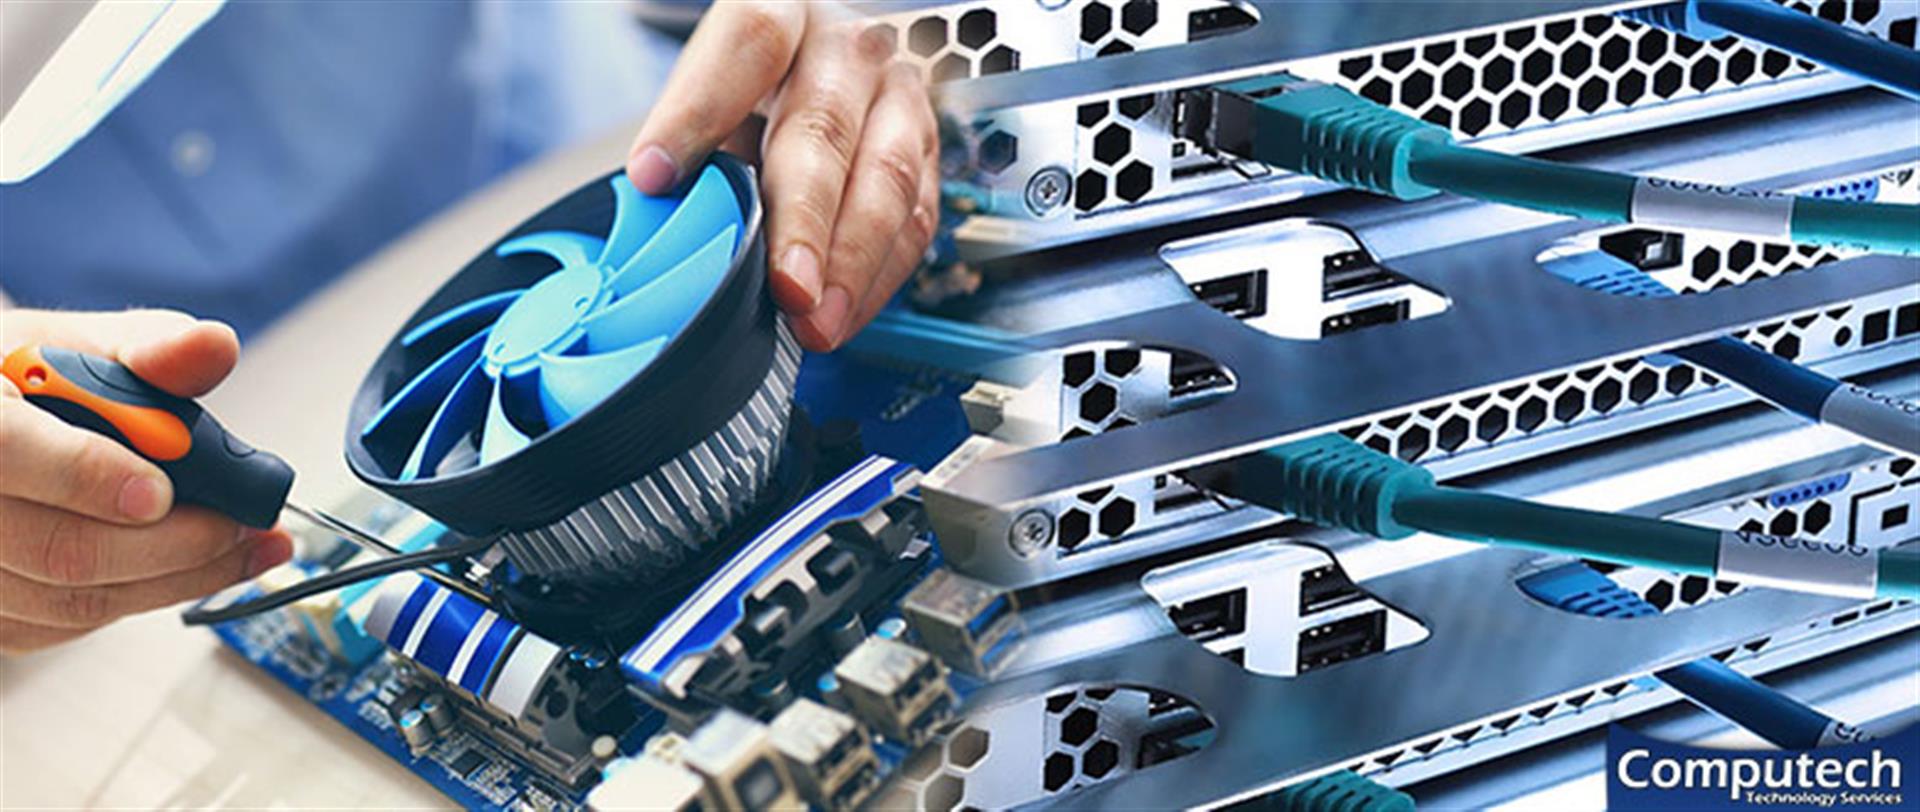 Vienna Georgia On Site Computer & Printer Repair, Network, Voice & Data Cabling Solutions